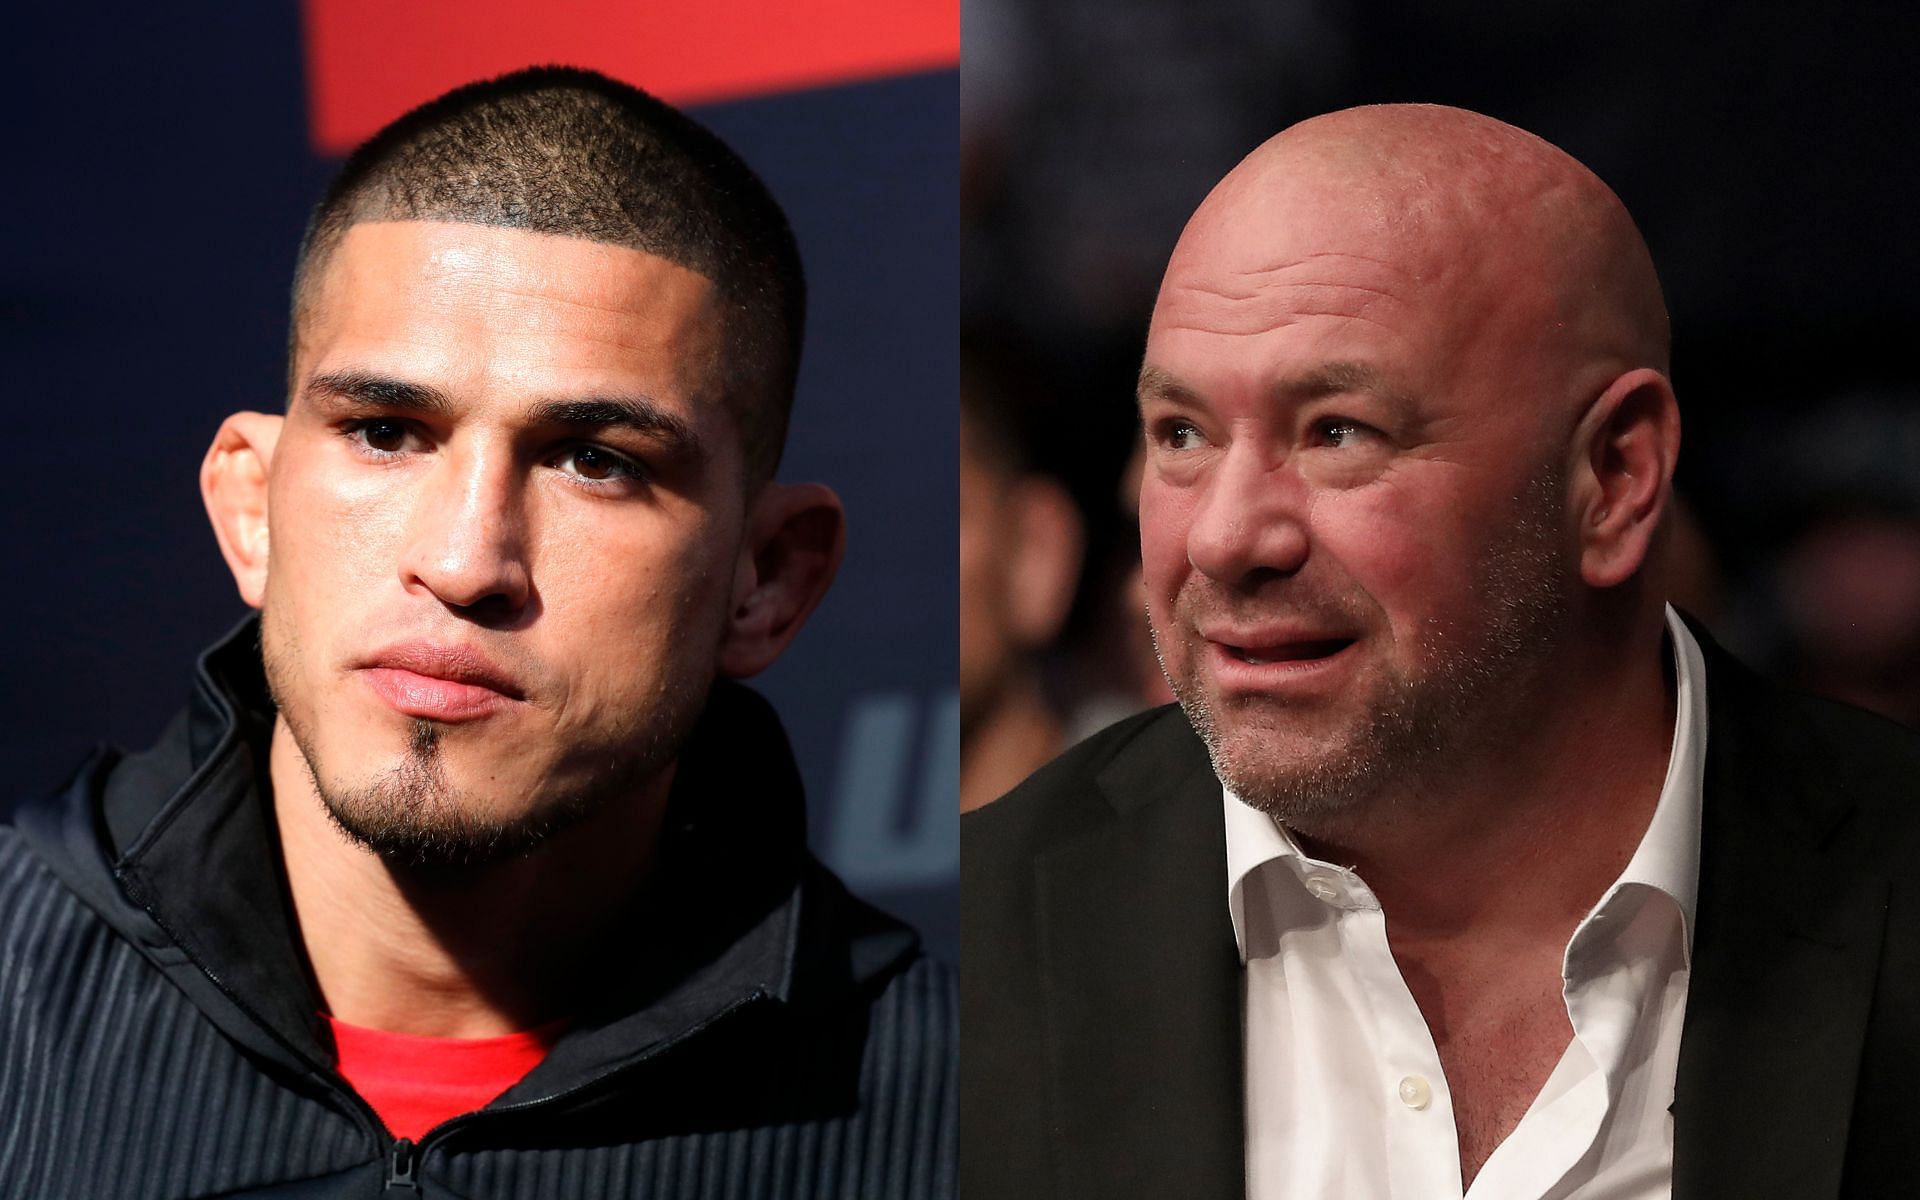 Anthony Pettis (left) and Dana White (right). [via Getty Images]